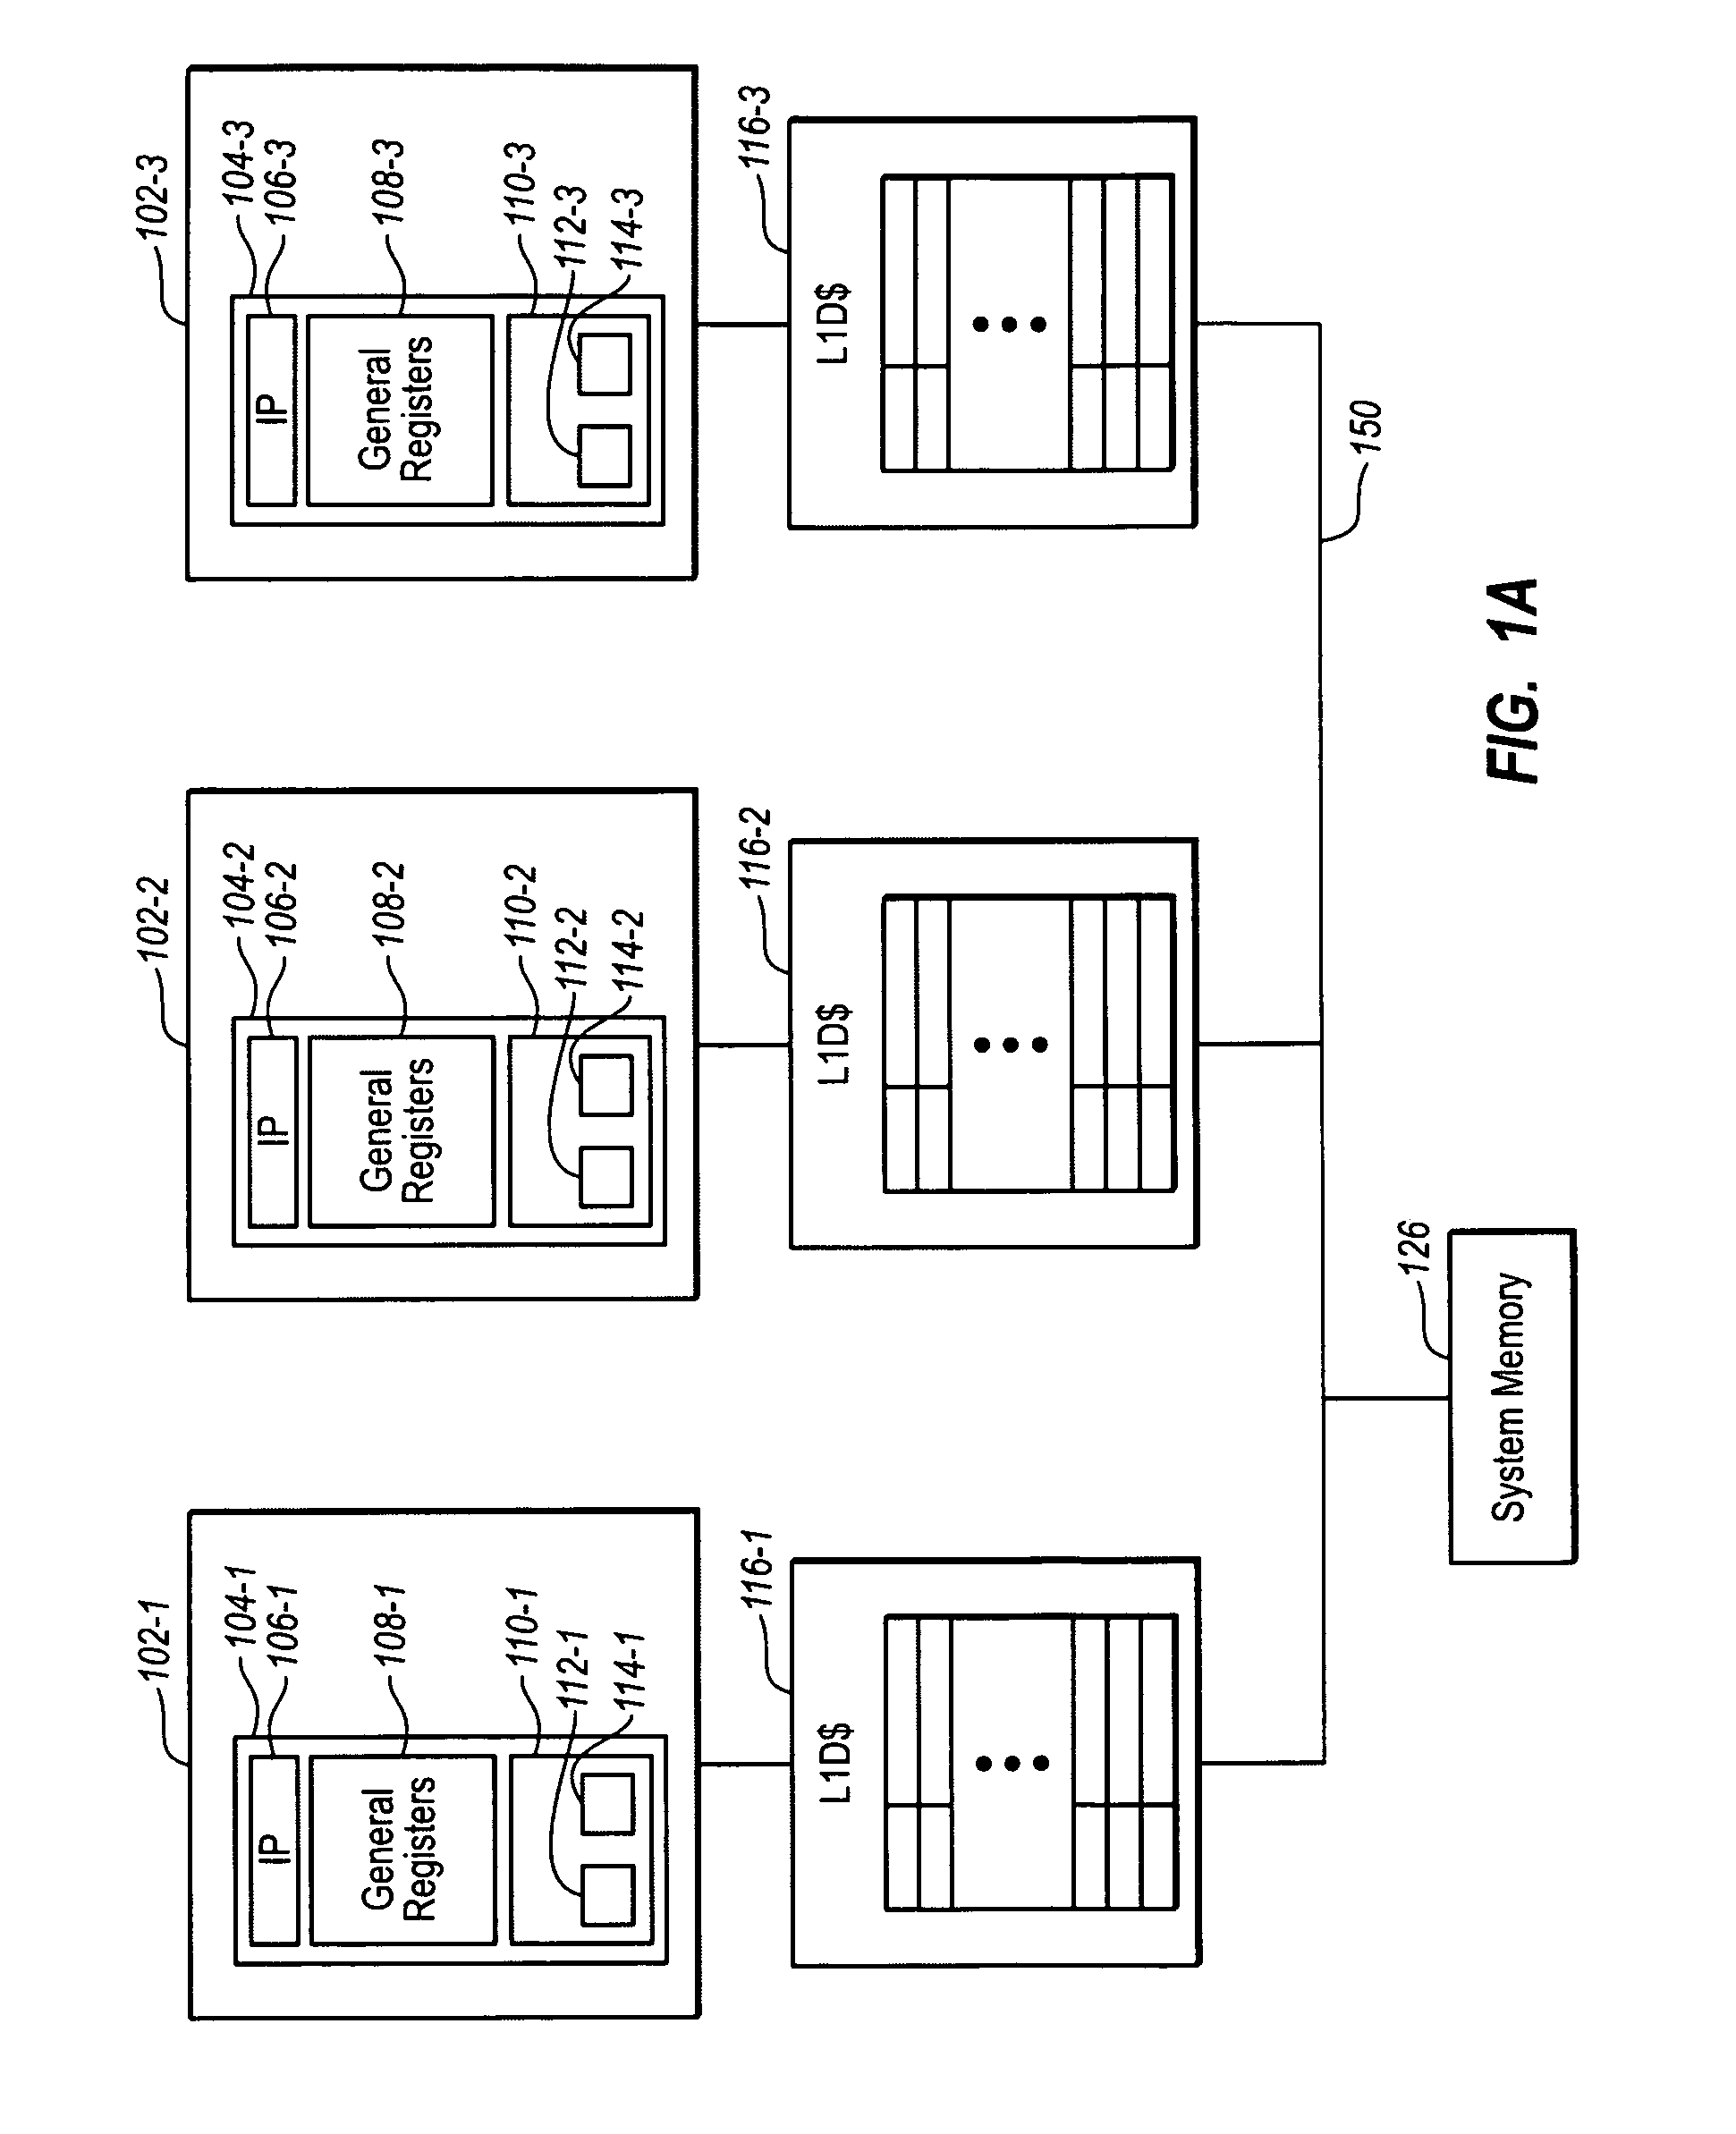 Hardware accelerated transactional memory system with open nested transactions